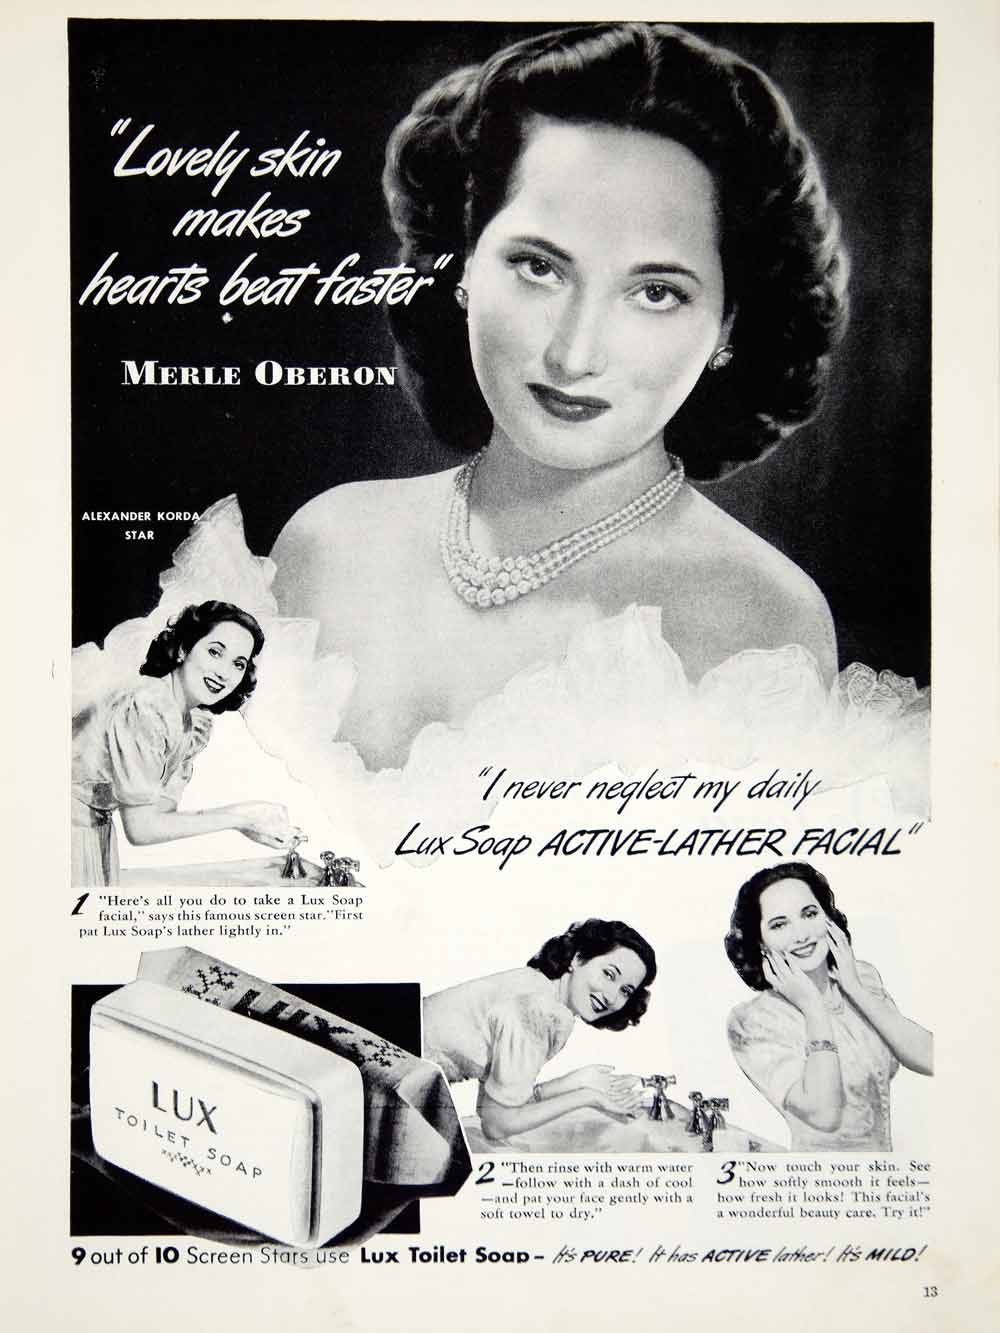 1942 Ad Vintage Lux Toilet Soap Merle Oberon Movie Actress Star Beauty Skin YHS1